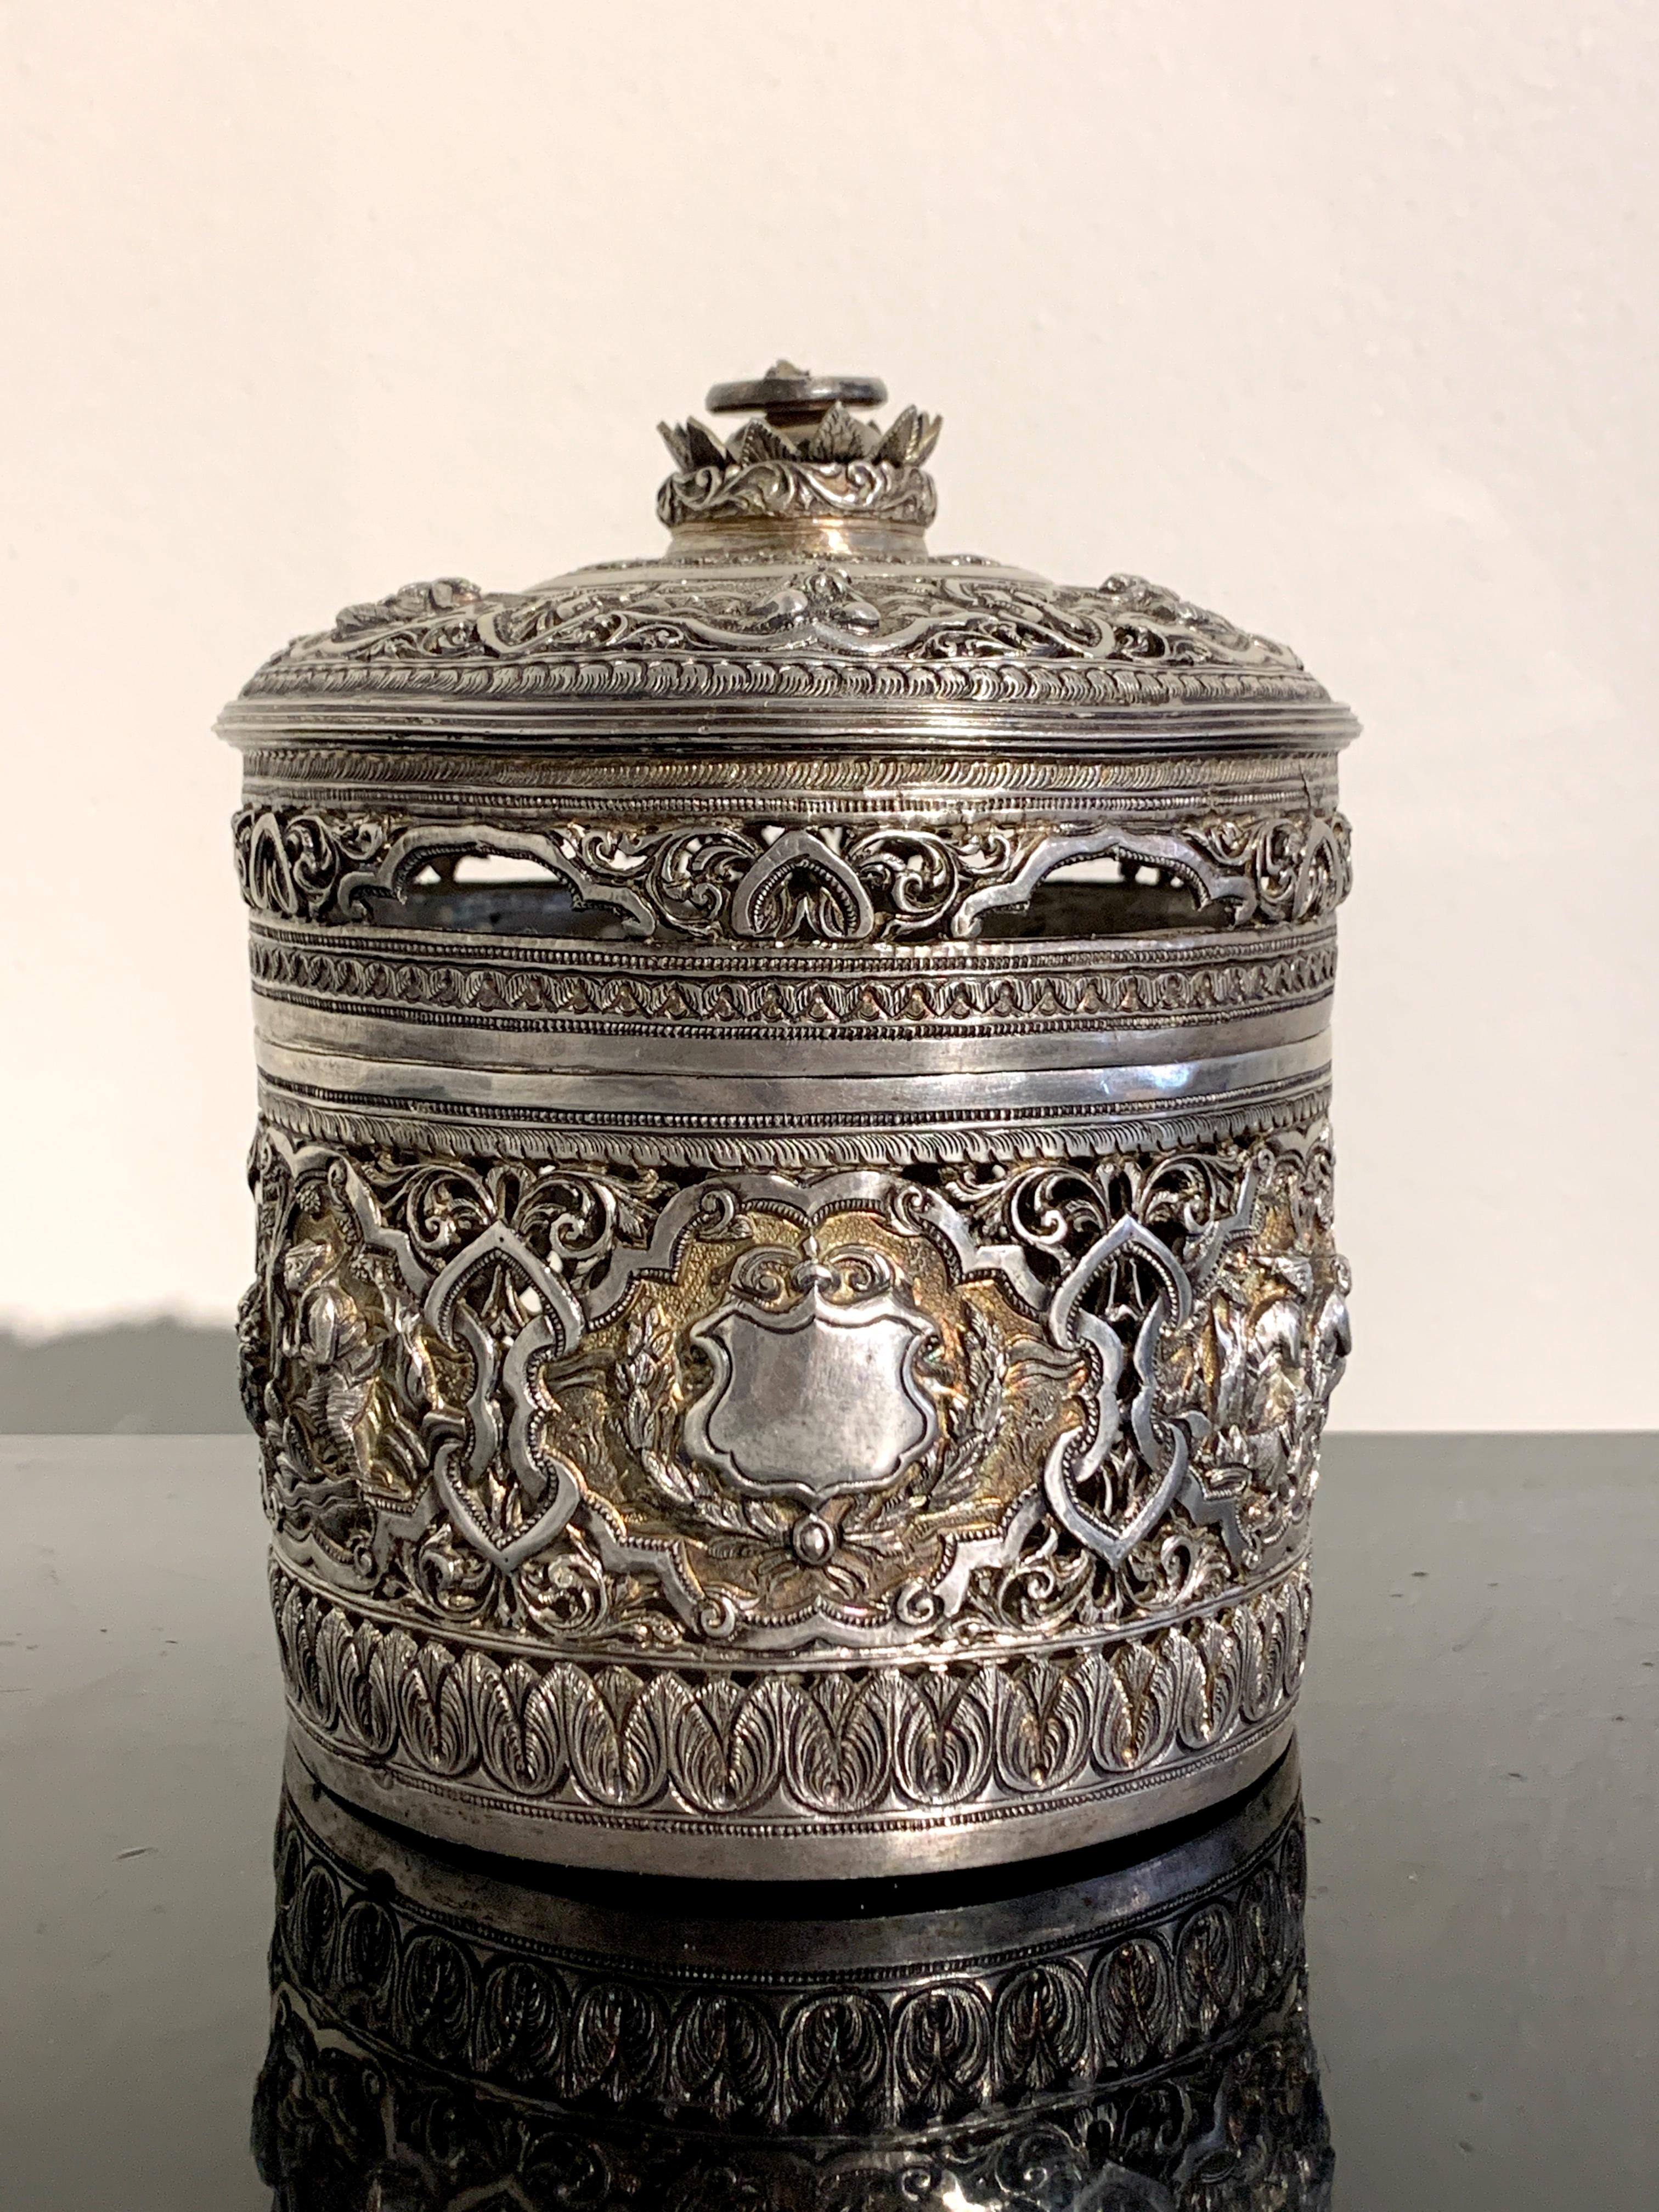 A very fine Burmese Colonial Period betel presentation box of pierced and repoussé silver with parcel gilding, early 20th century, Burma (Myanmar). 

The round betel box in three parts, consisting of the lid, interior tray, and box, expertly